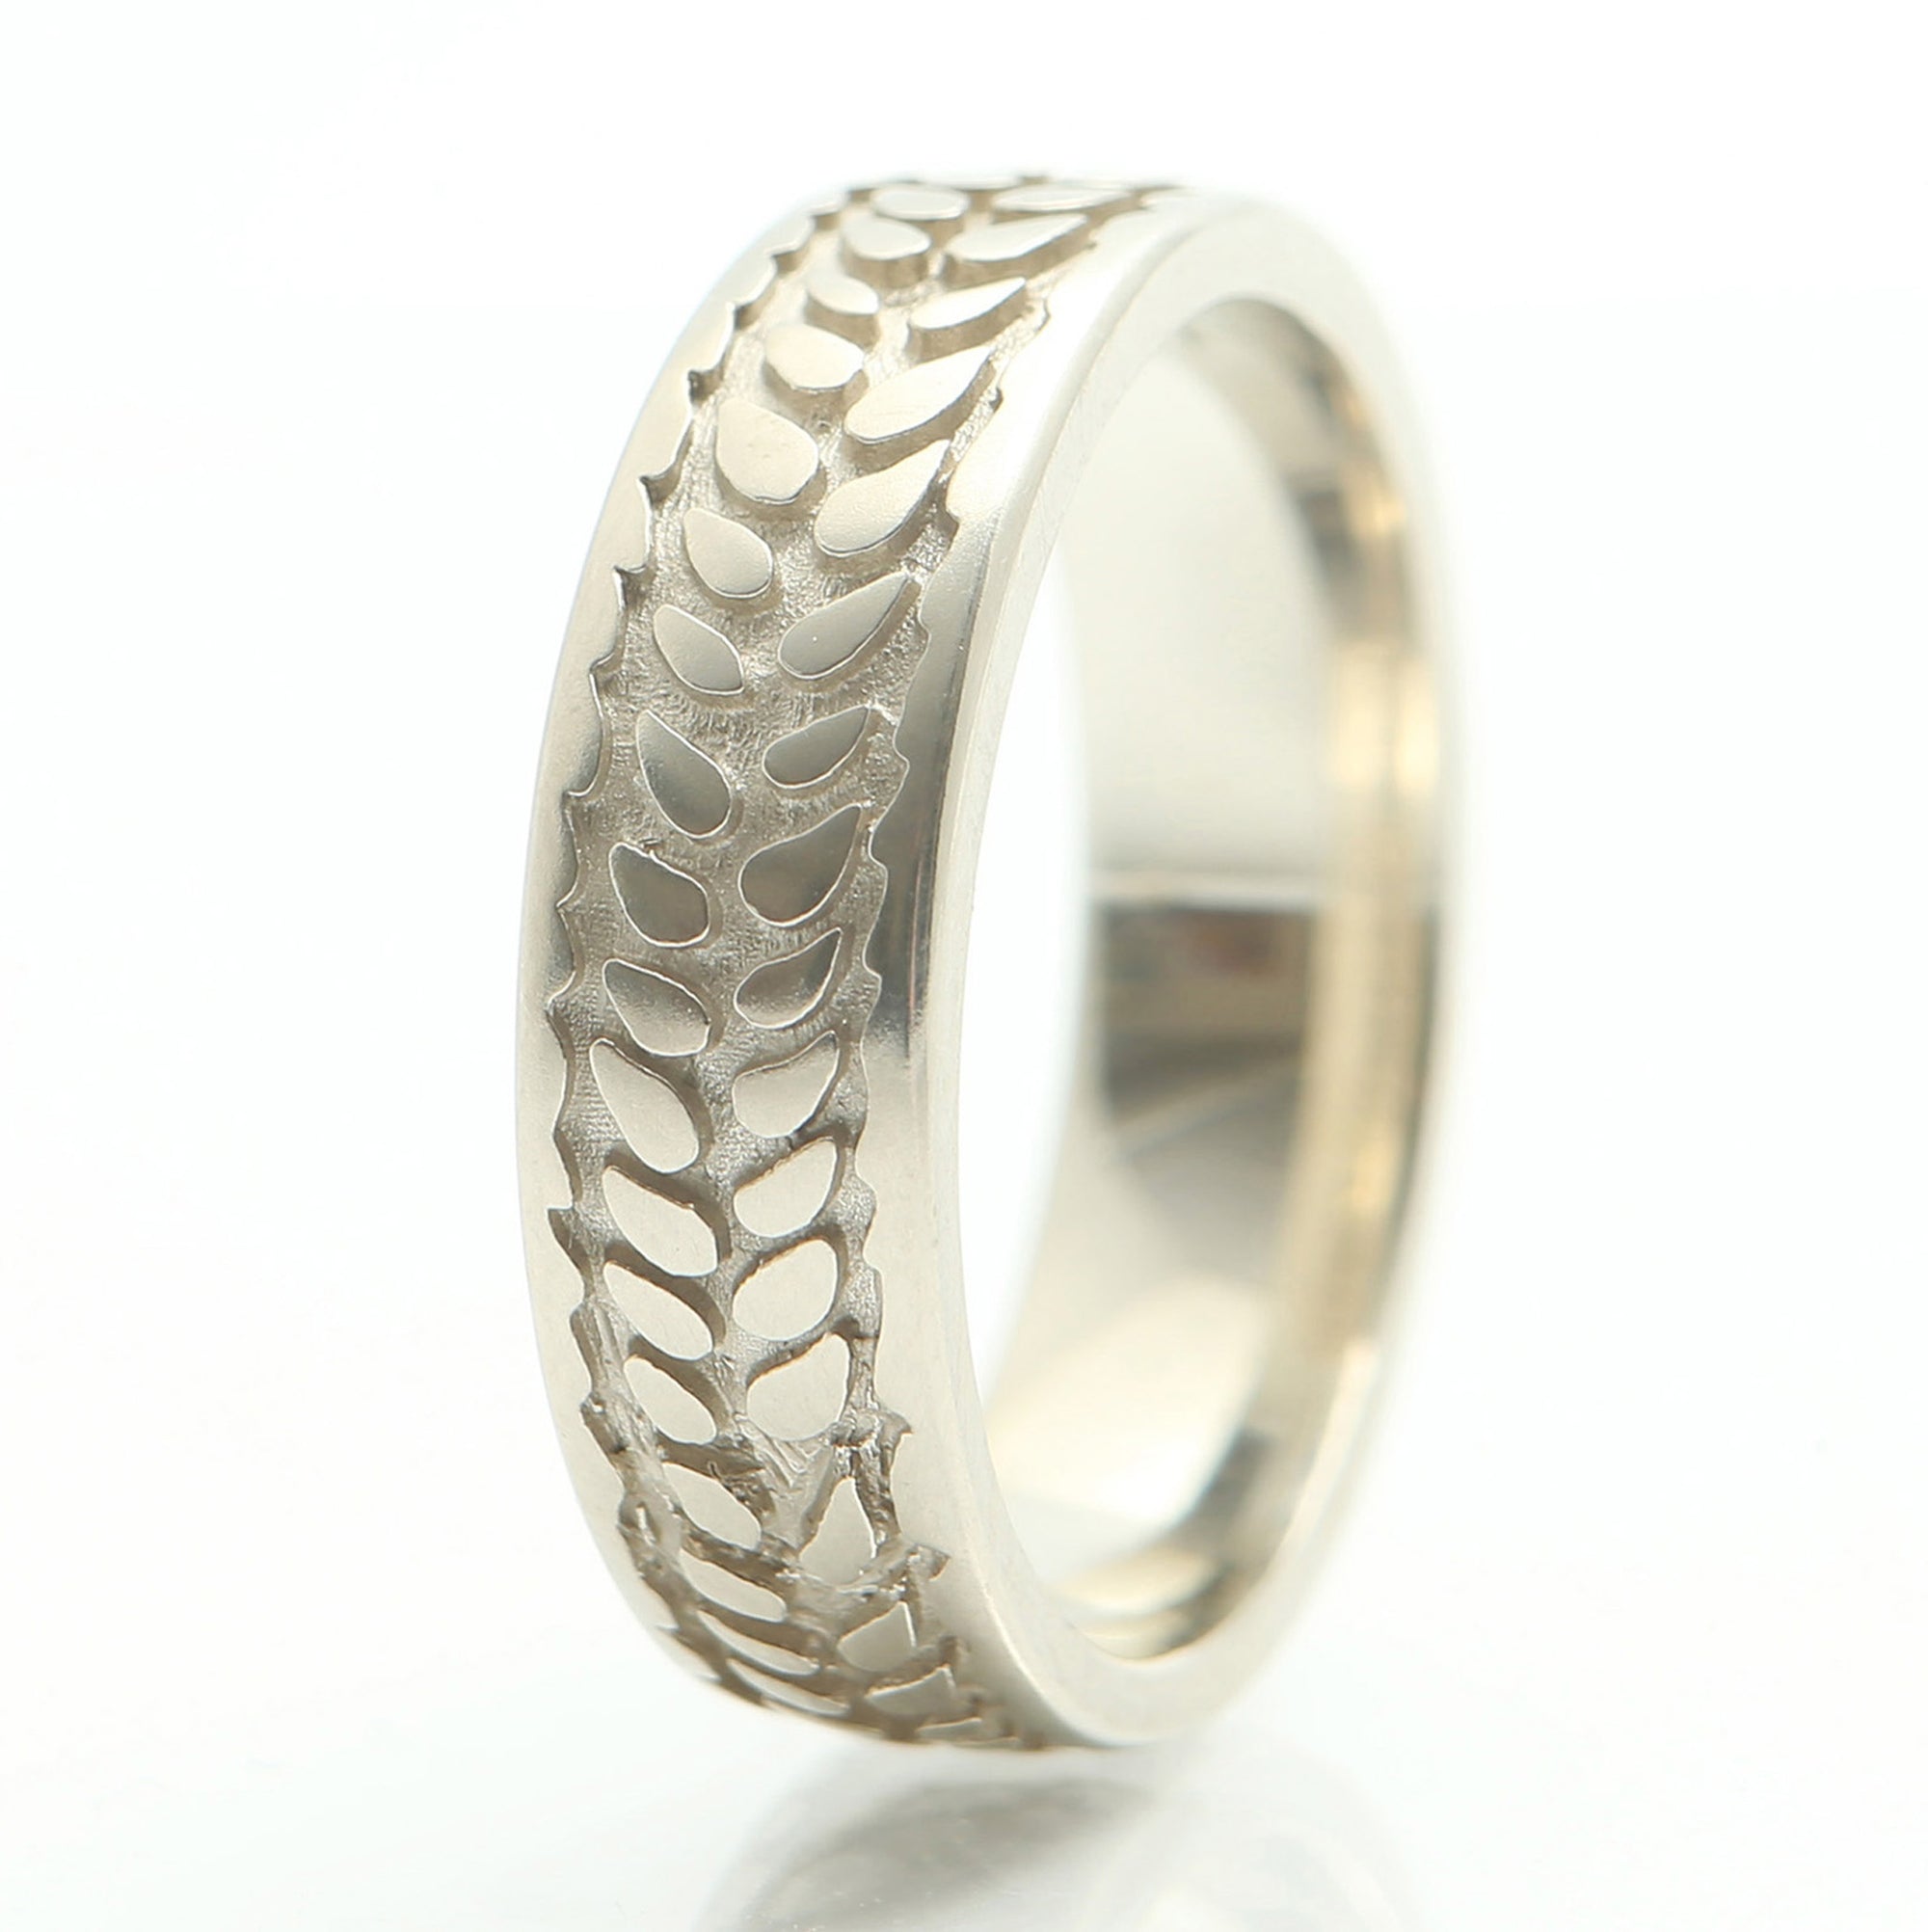 Barley Ring in Narrow 14k Yellow or White Gold